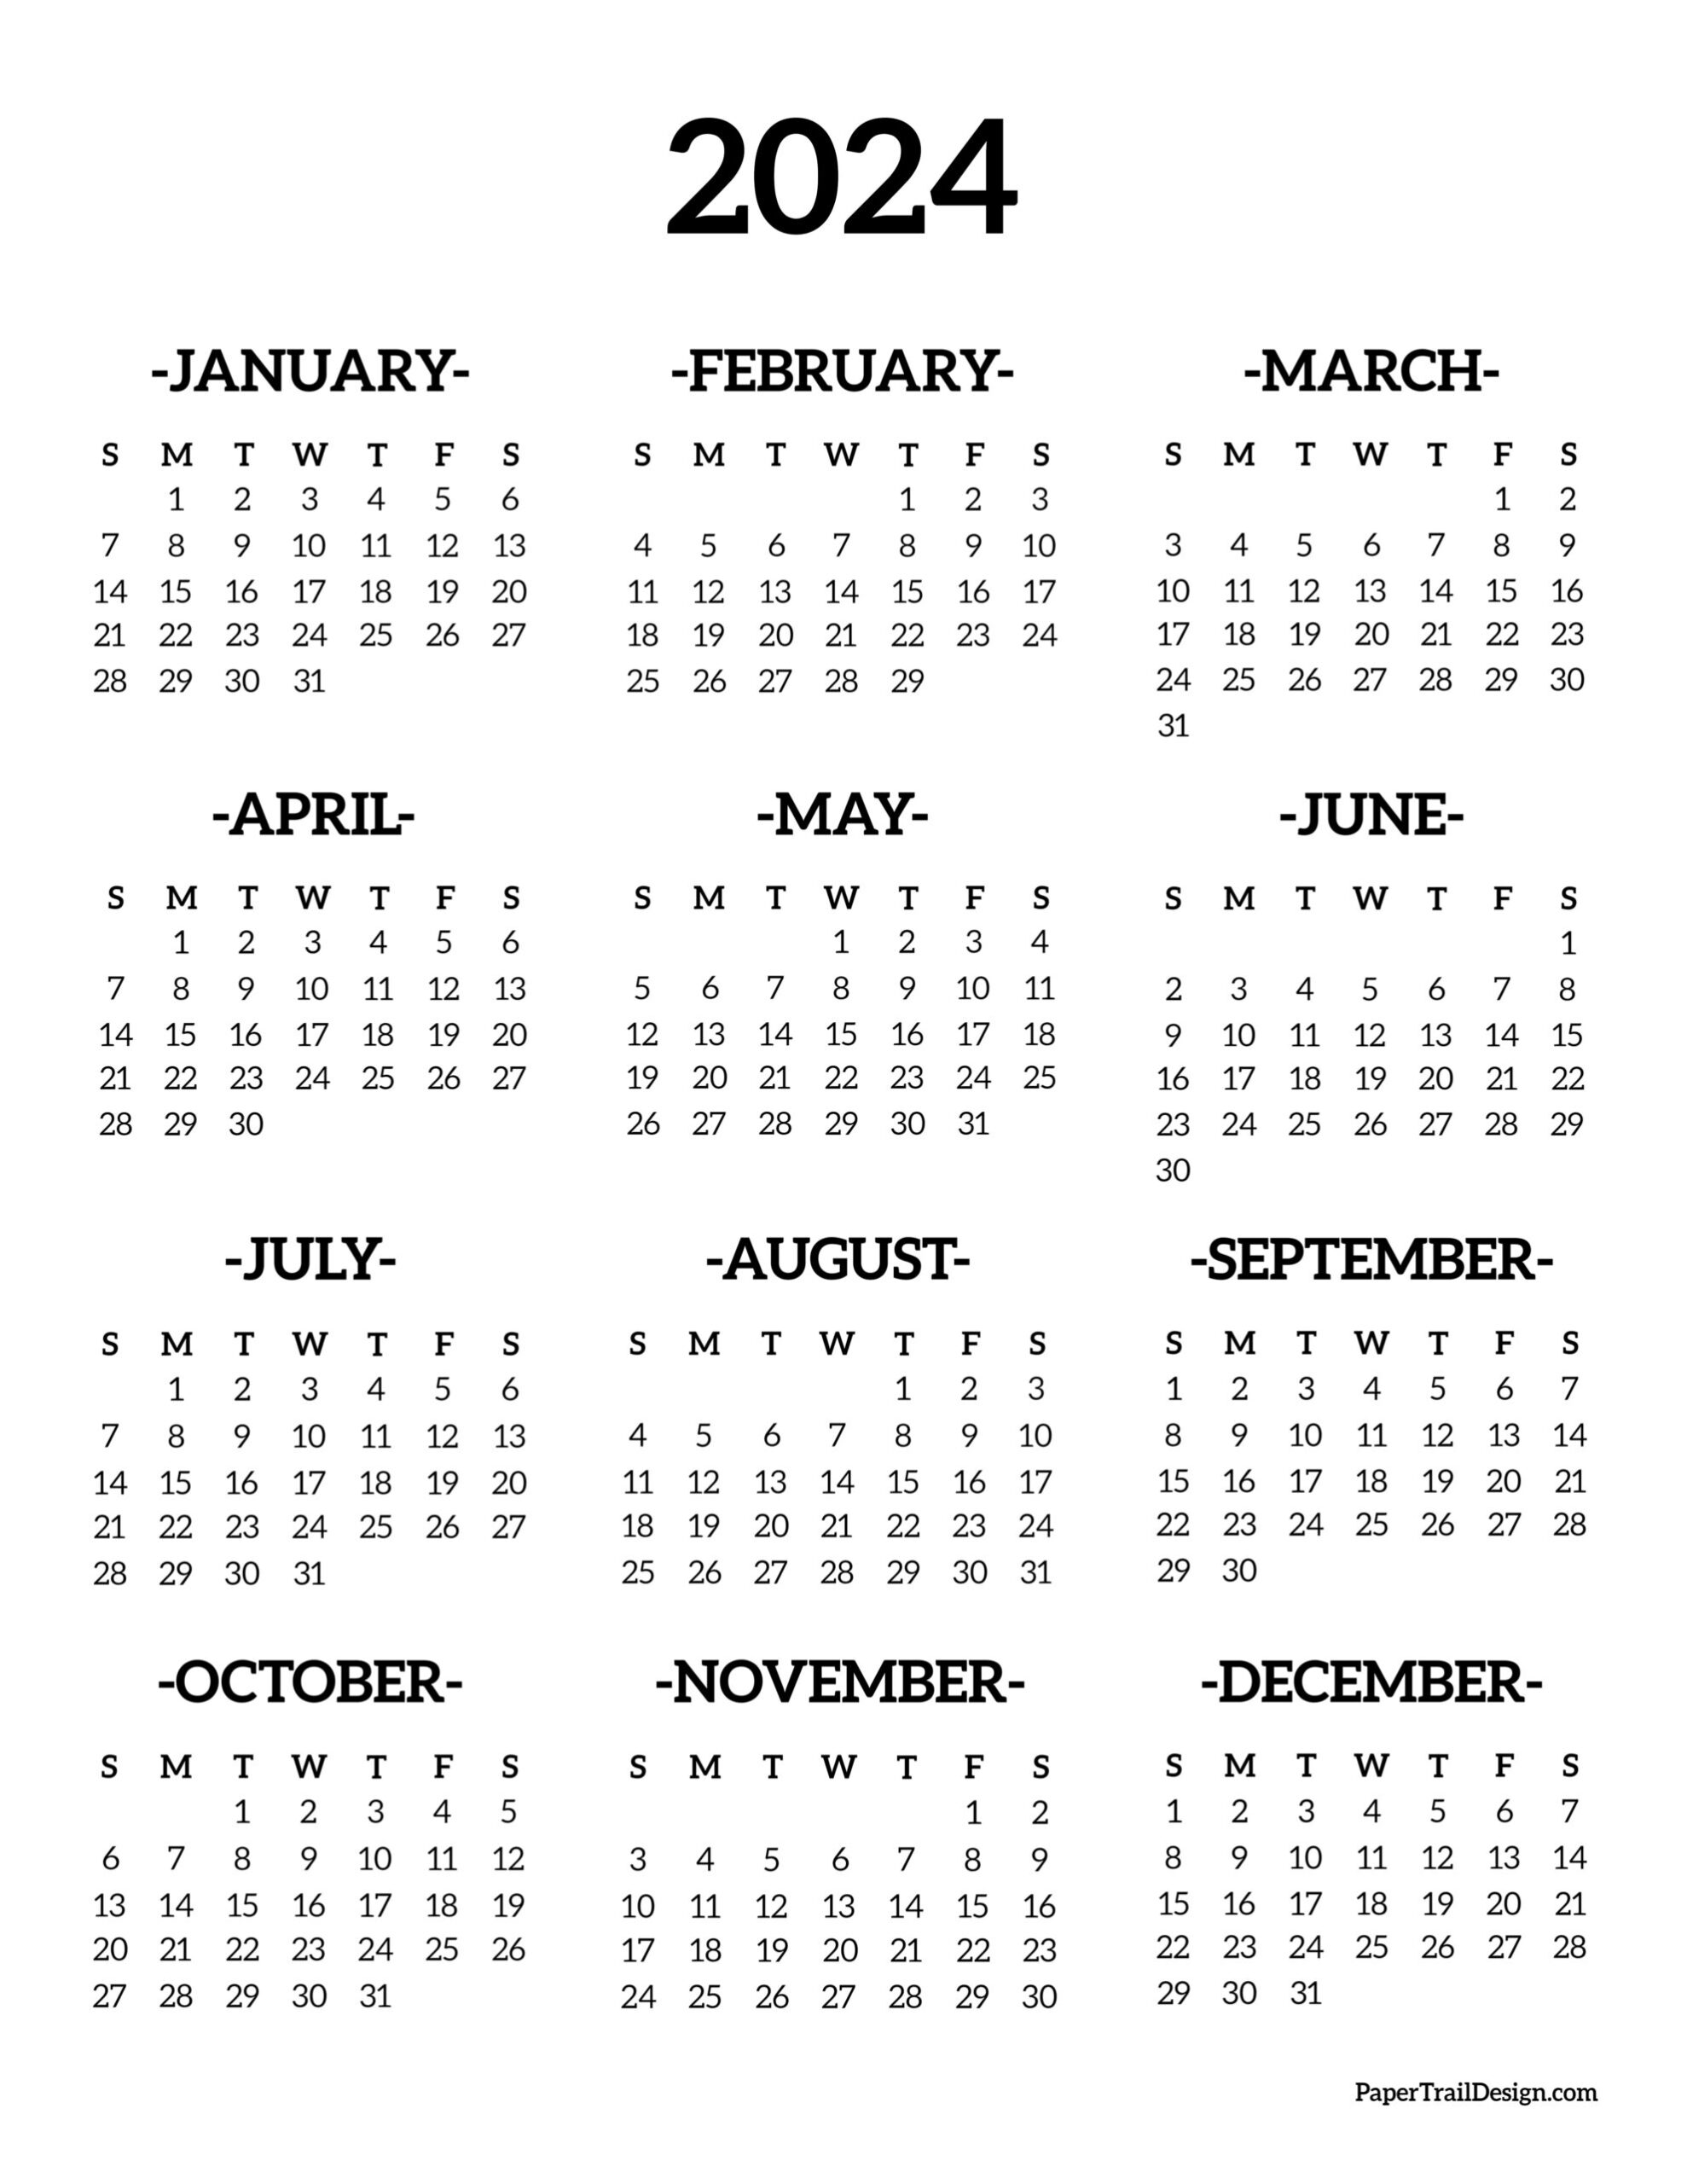 Calendar 2024 Printable One Page - Paper Trail Design for 2024 Calendar On One Page Printable